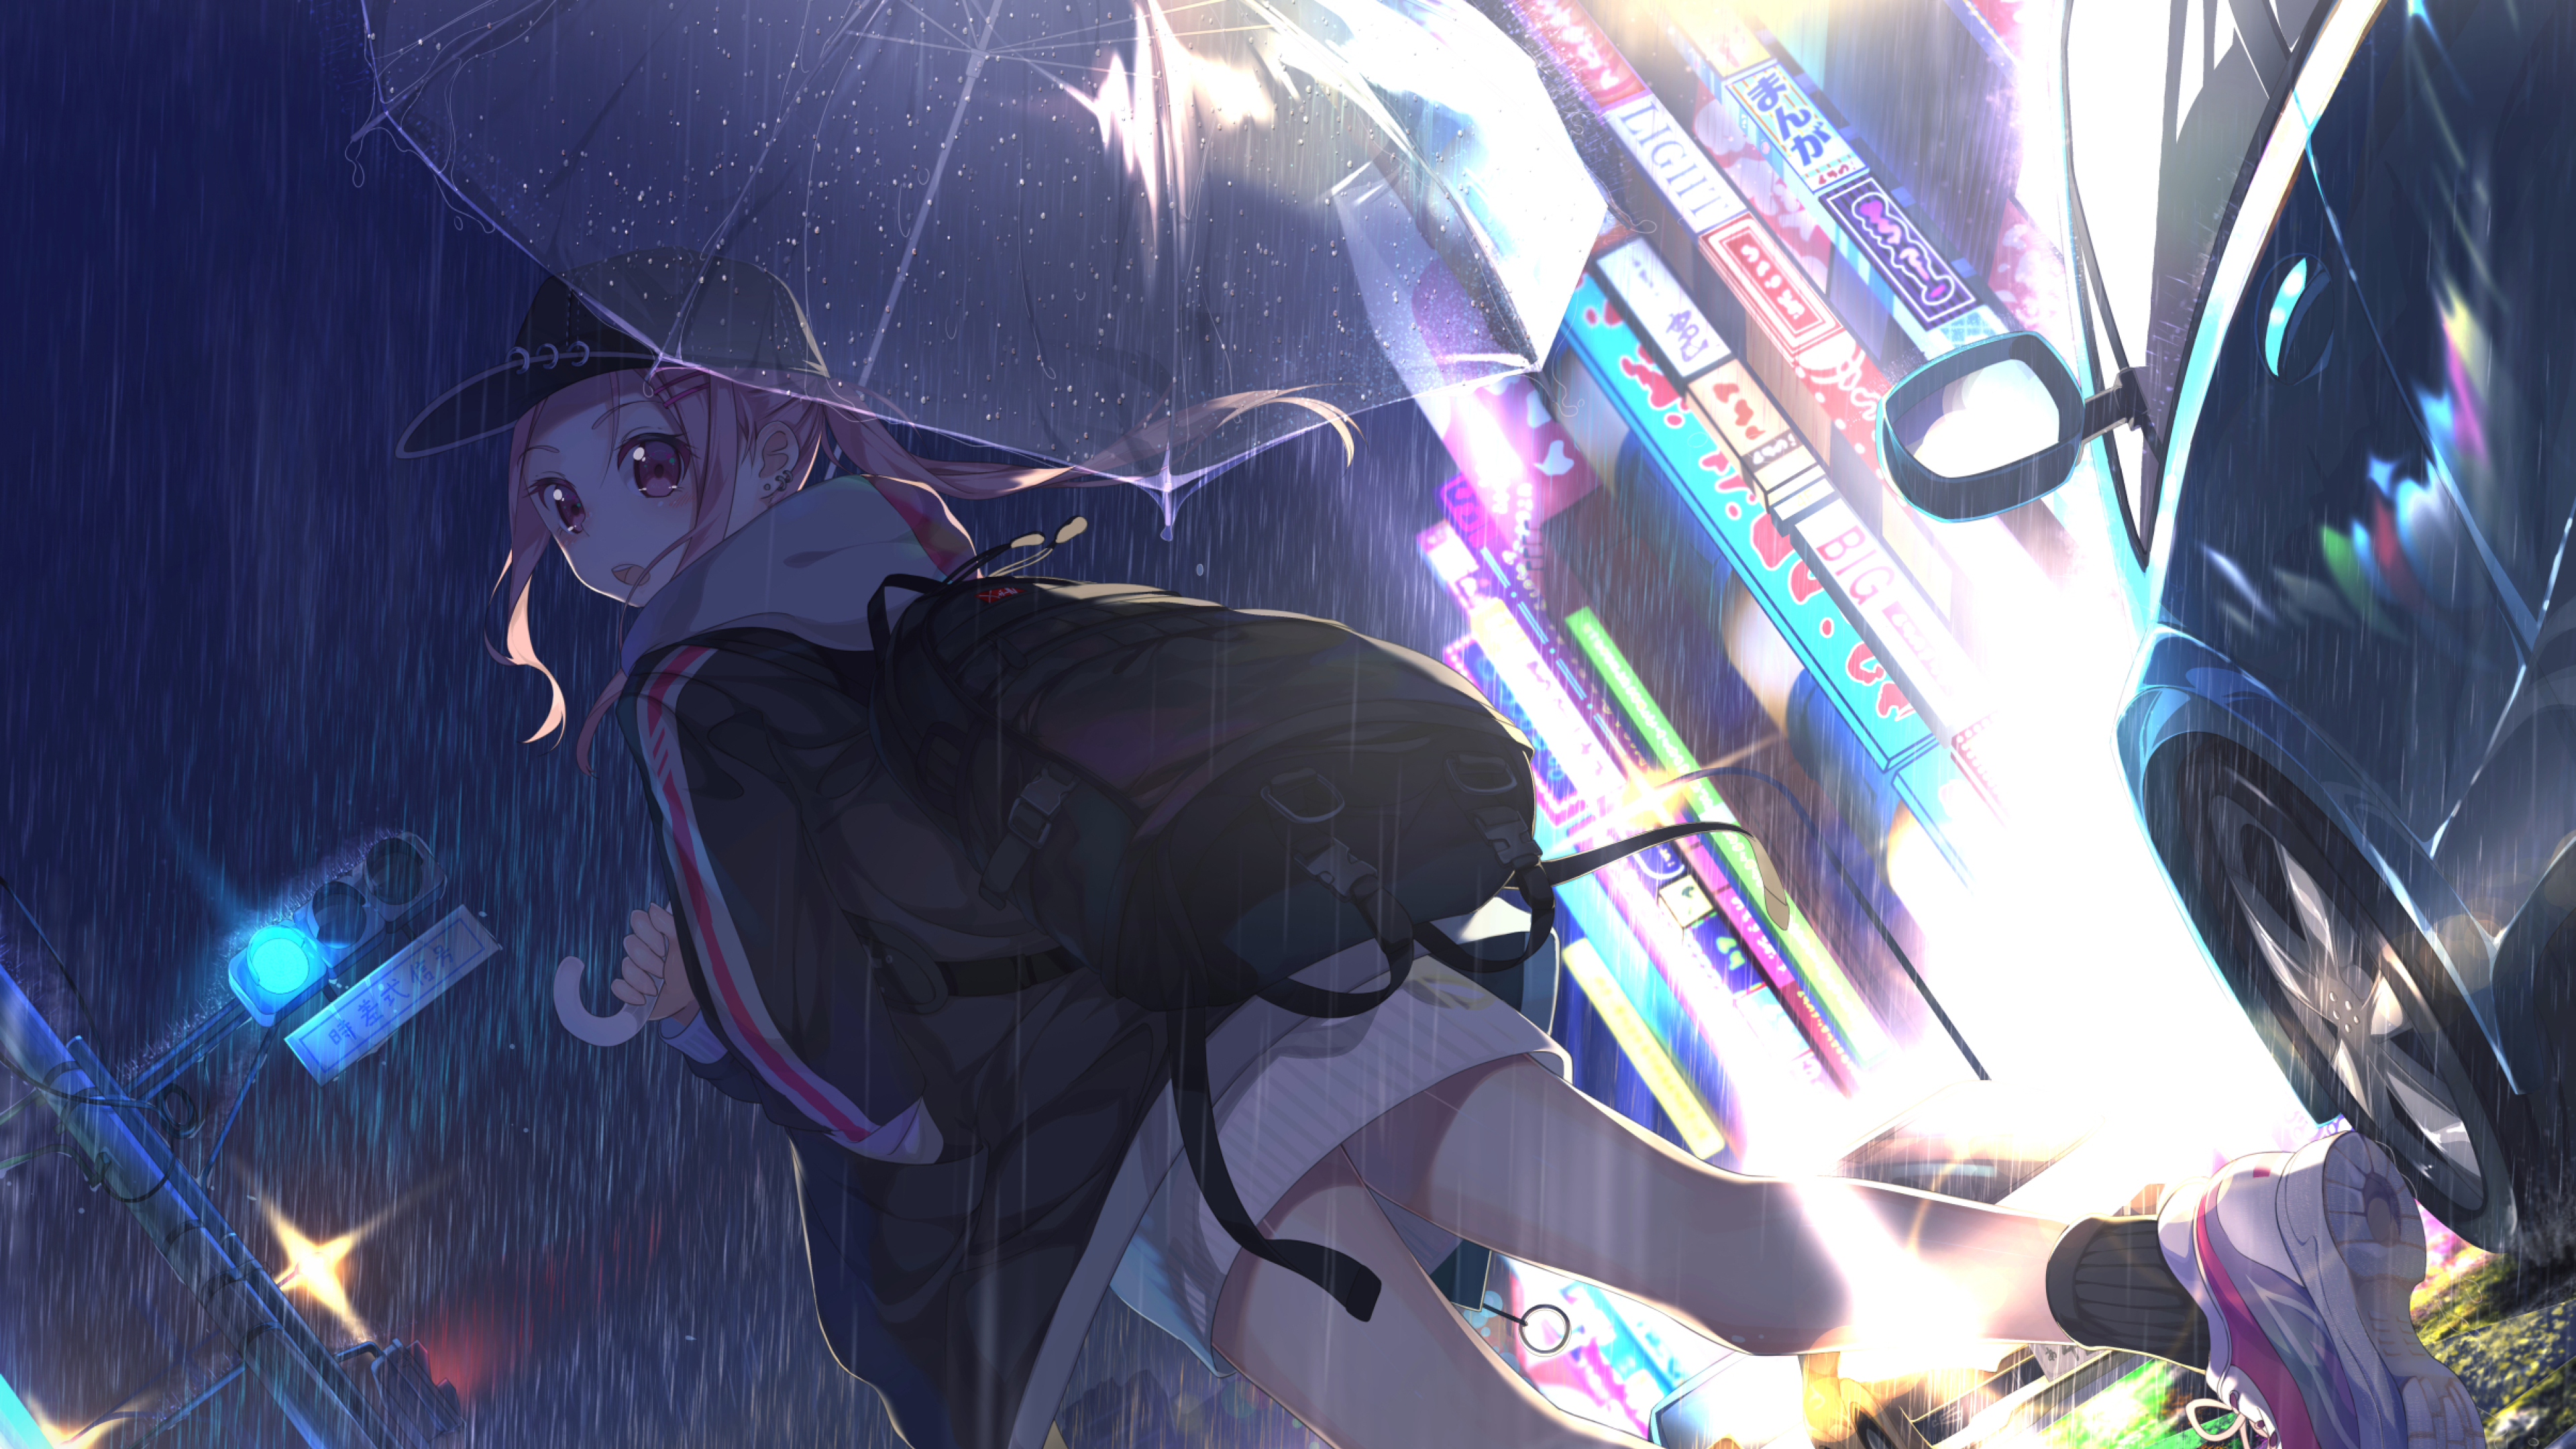 3840x2160 Anime Girl With Umbrella In Rain 4k Wallpaper Hd Anime 4k Wallpapers Images Photos And Background